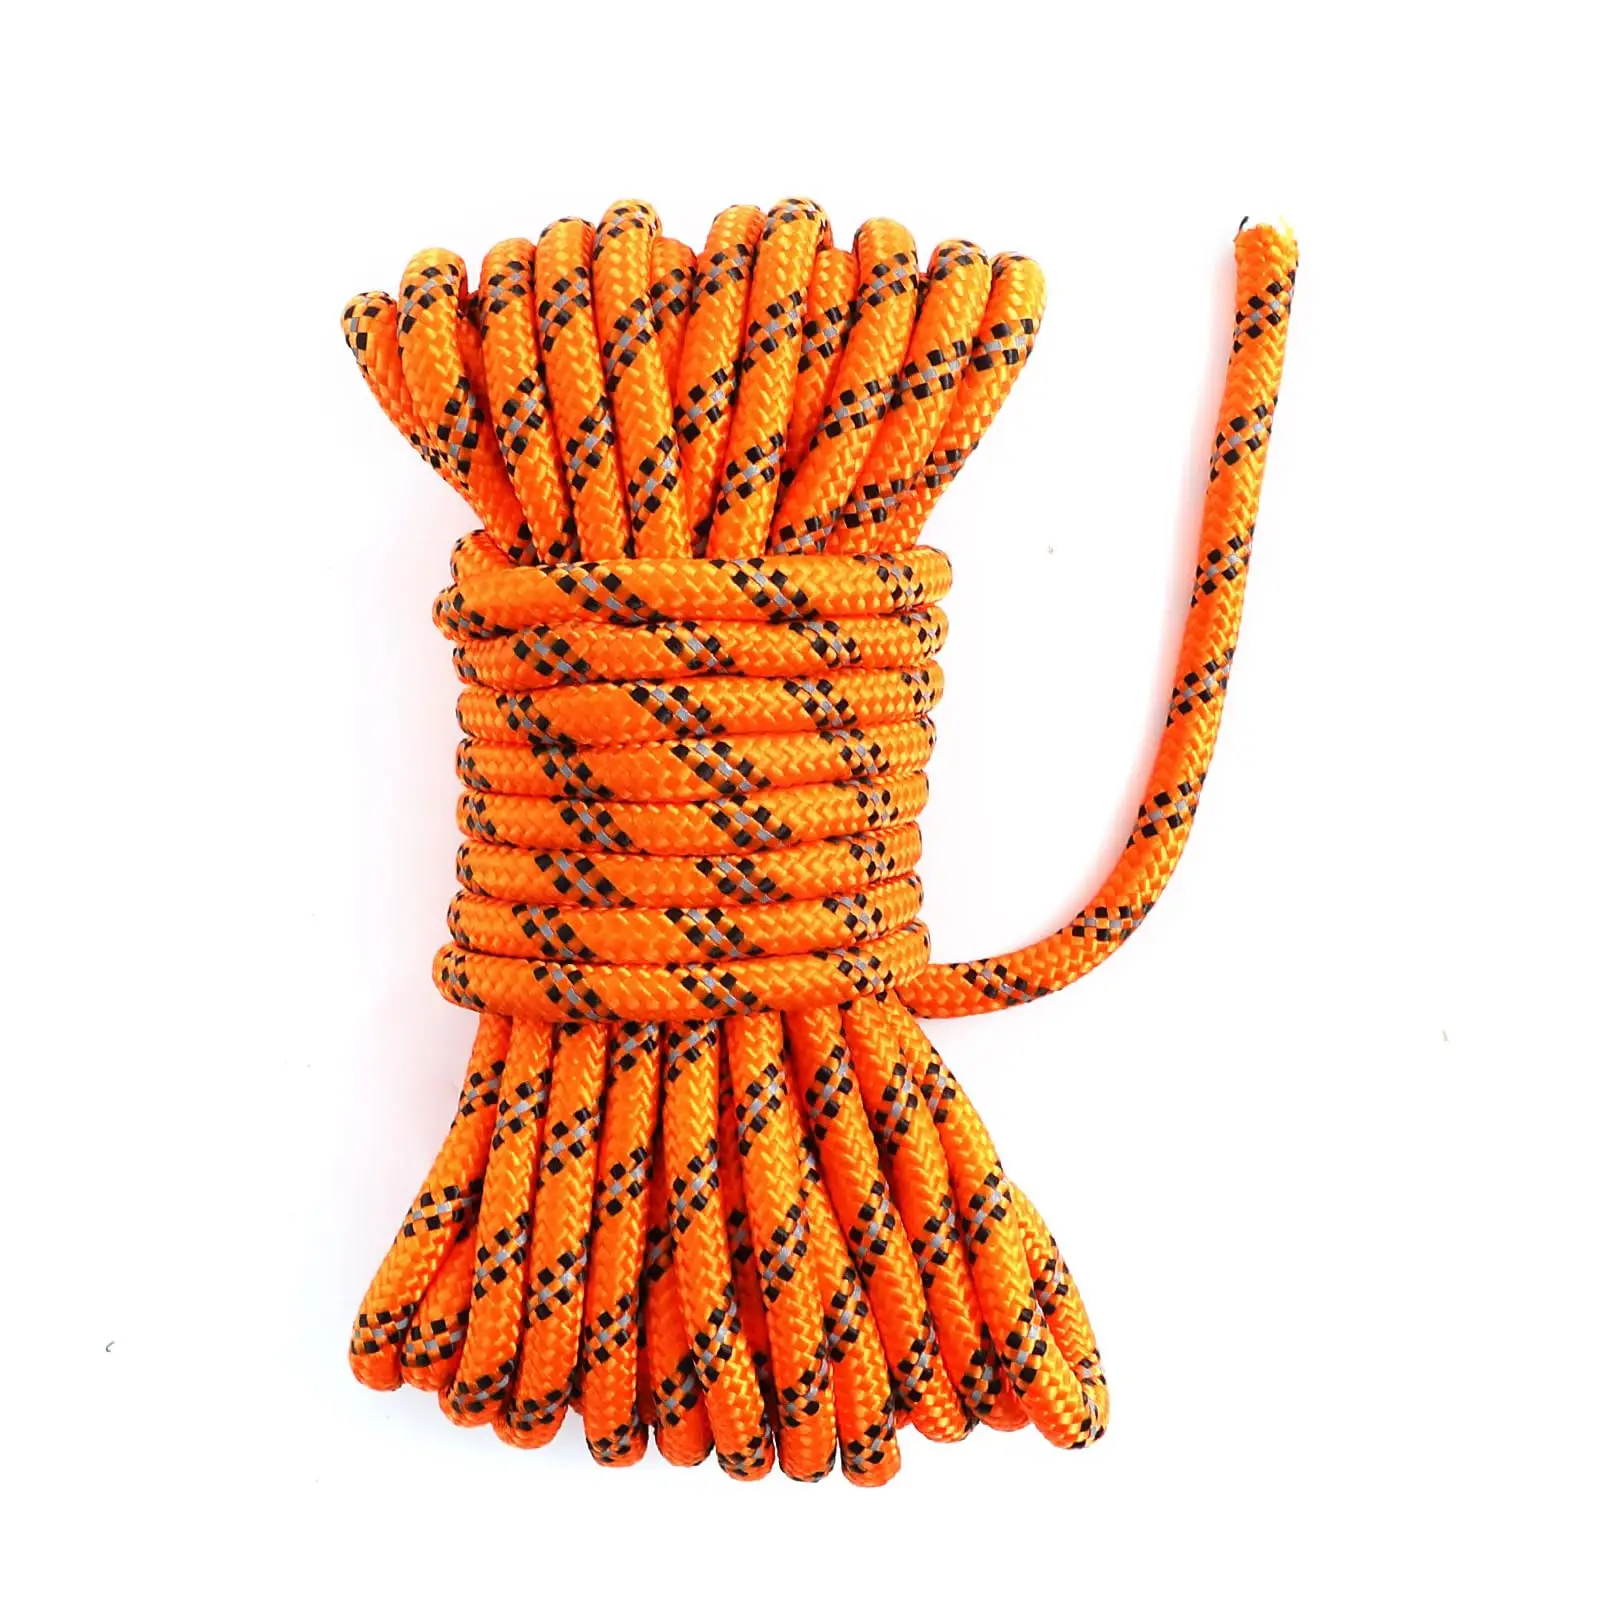 750lb 10m Mountaineering Rescue Fire Escape for Camping Clothsline Camping Hiking Gear Survival Emergency Survival Rope